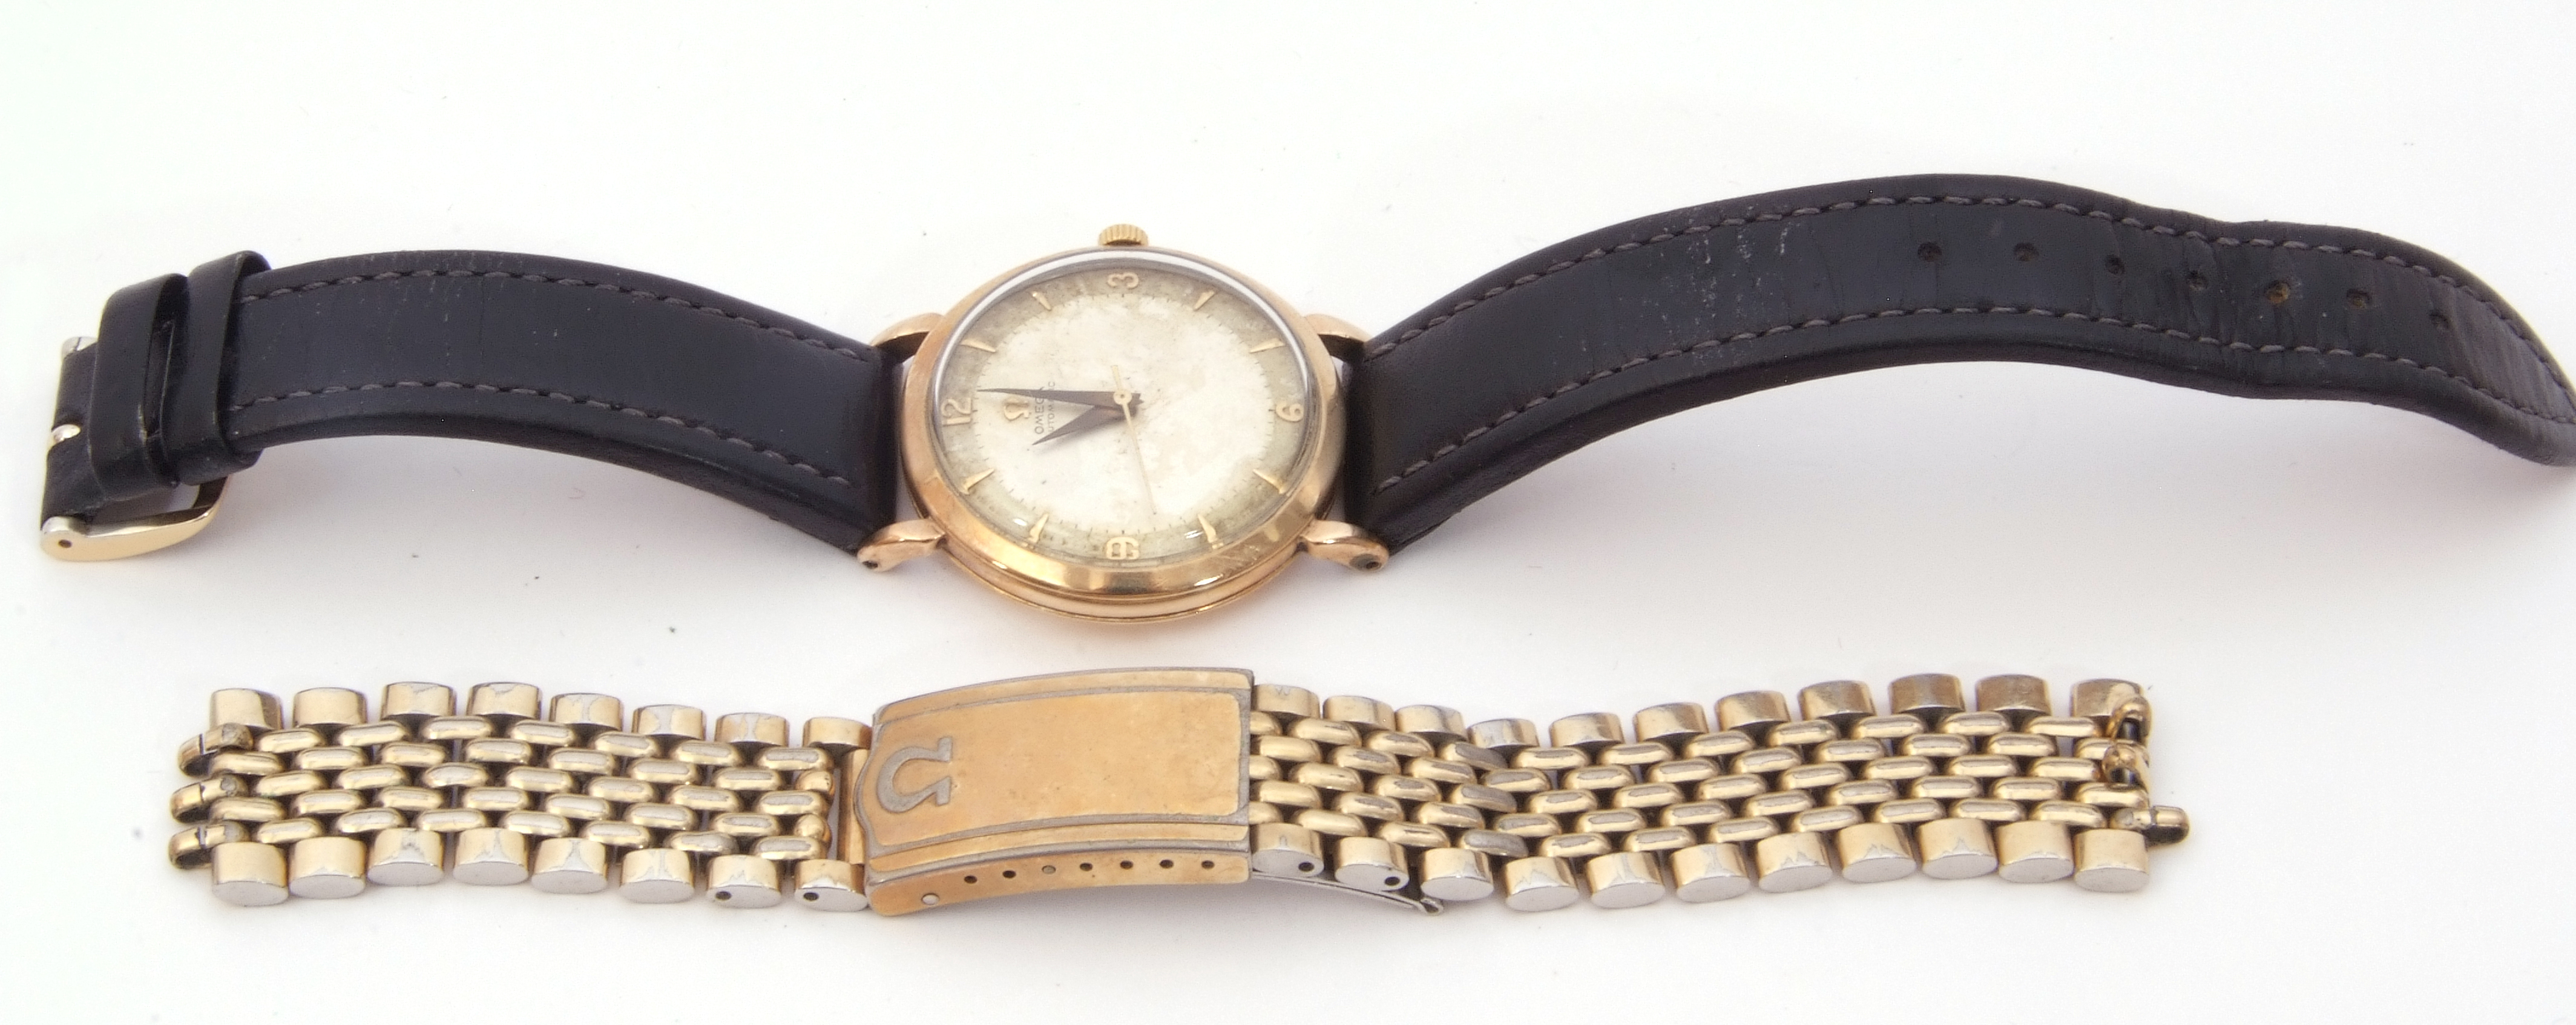 Third quarter of the 20th century gents Omega 9ct gold cased automatic movement wrist watch, with - Image 13 of 14